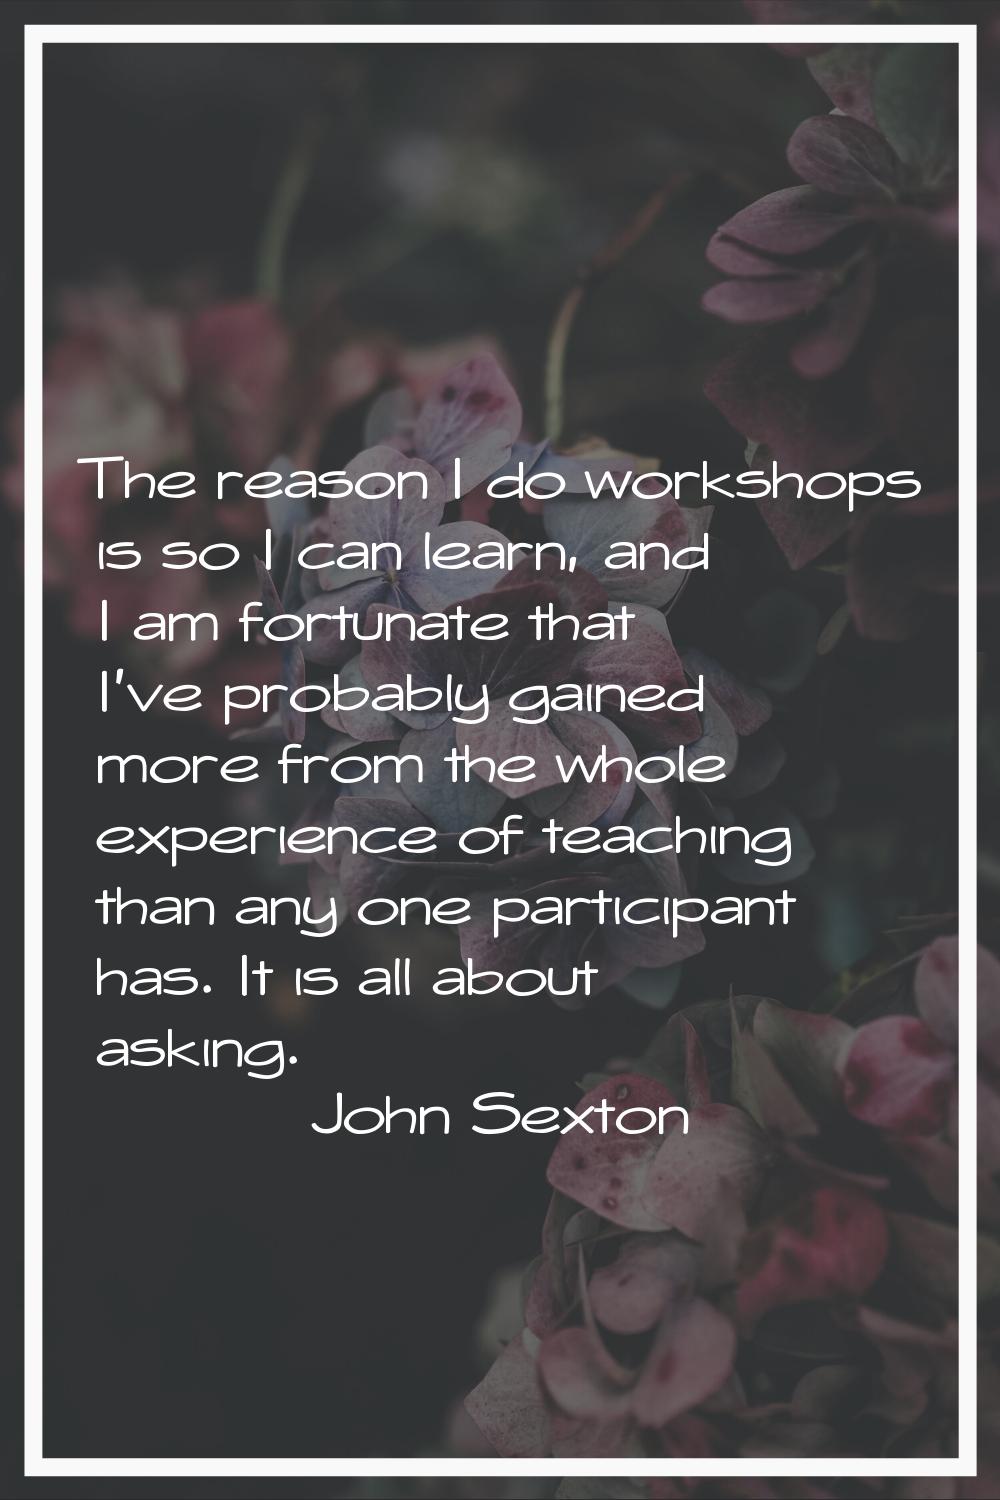 The reason I do workshops is so I can learn, and I am fortunate that I've probably gained more from